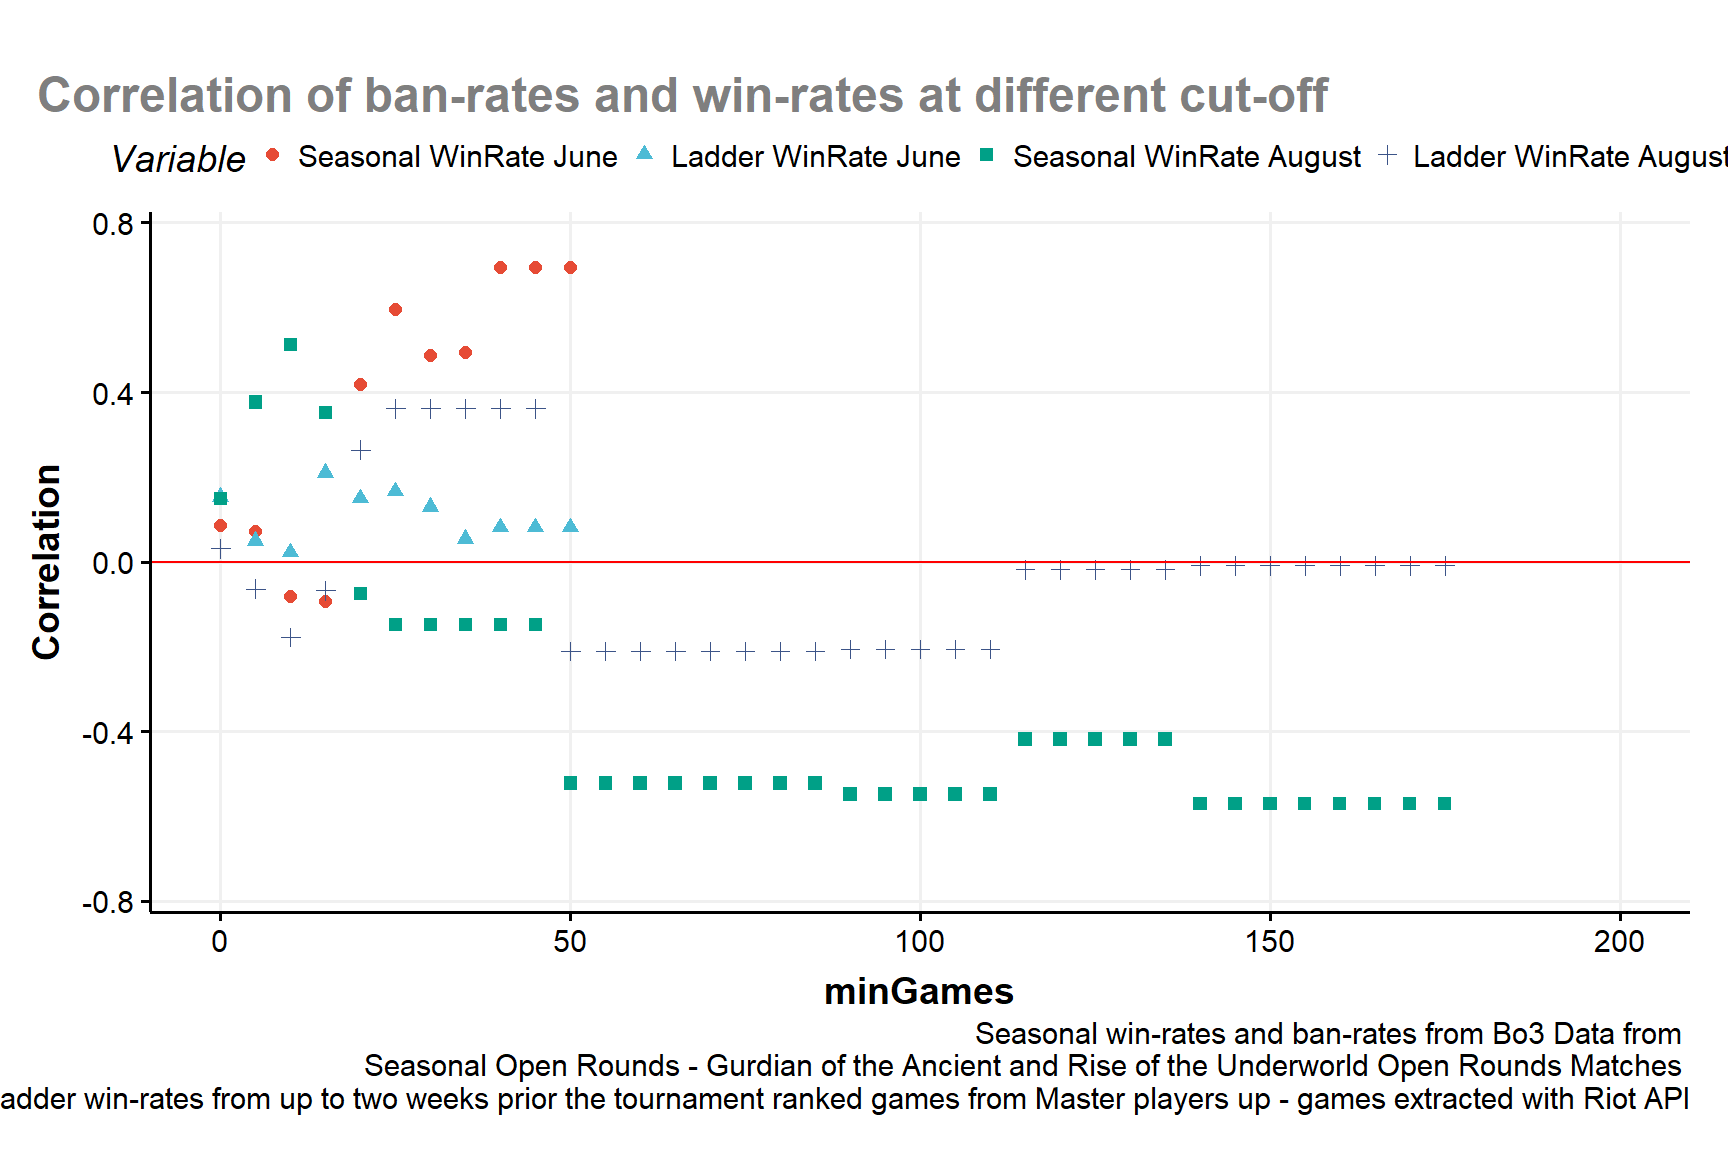 correlation of Seasonal Win-Rates and Ladder Win-Rates with the Ban-Rates at different benchmarks of minimum amount of games for each deck